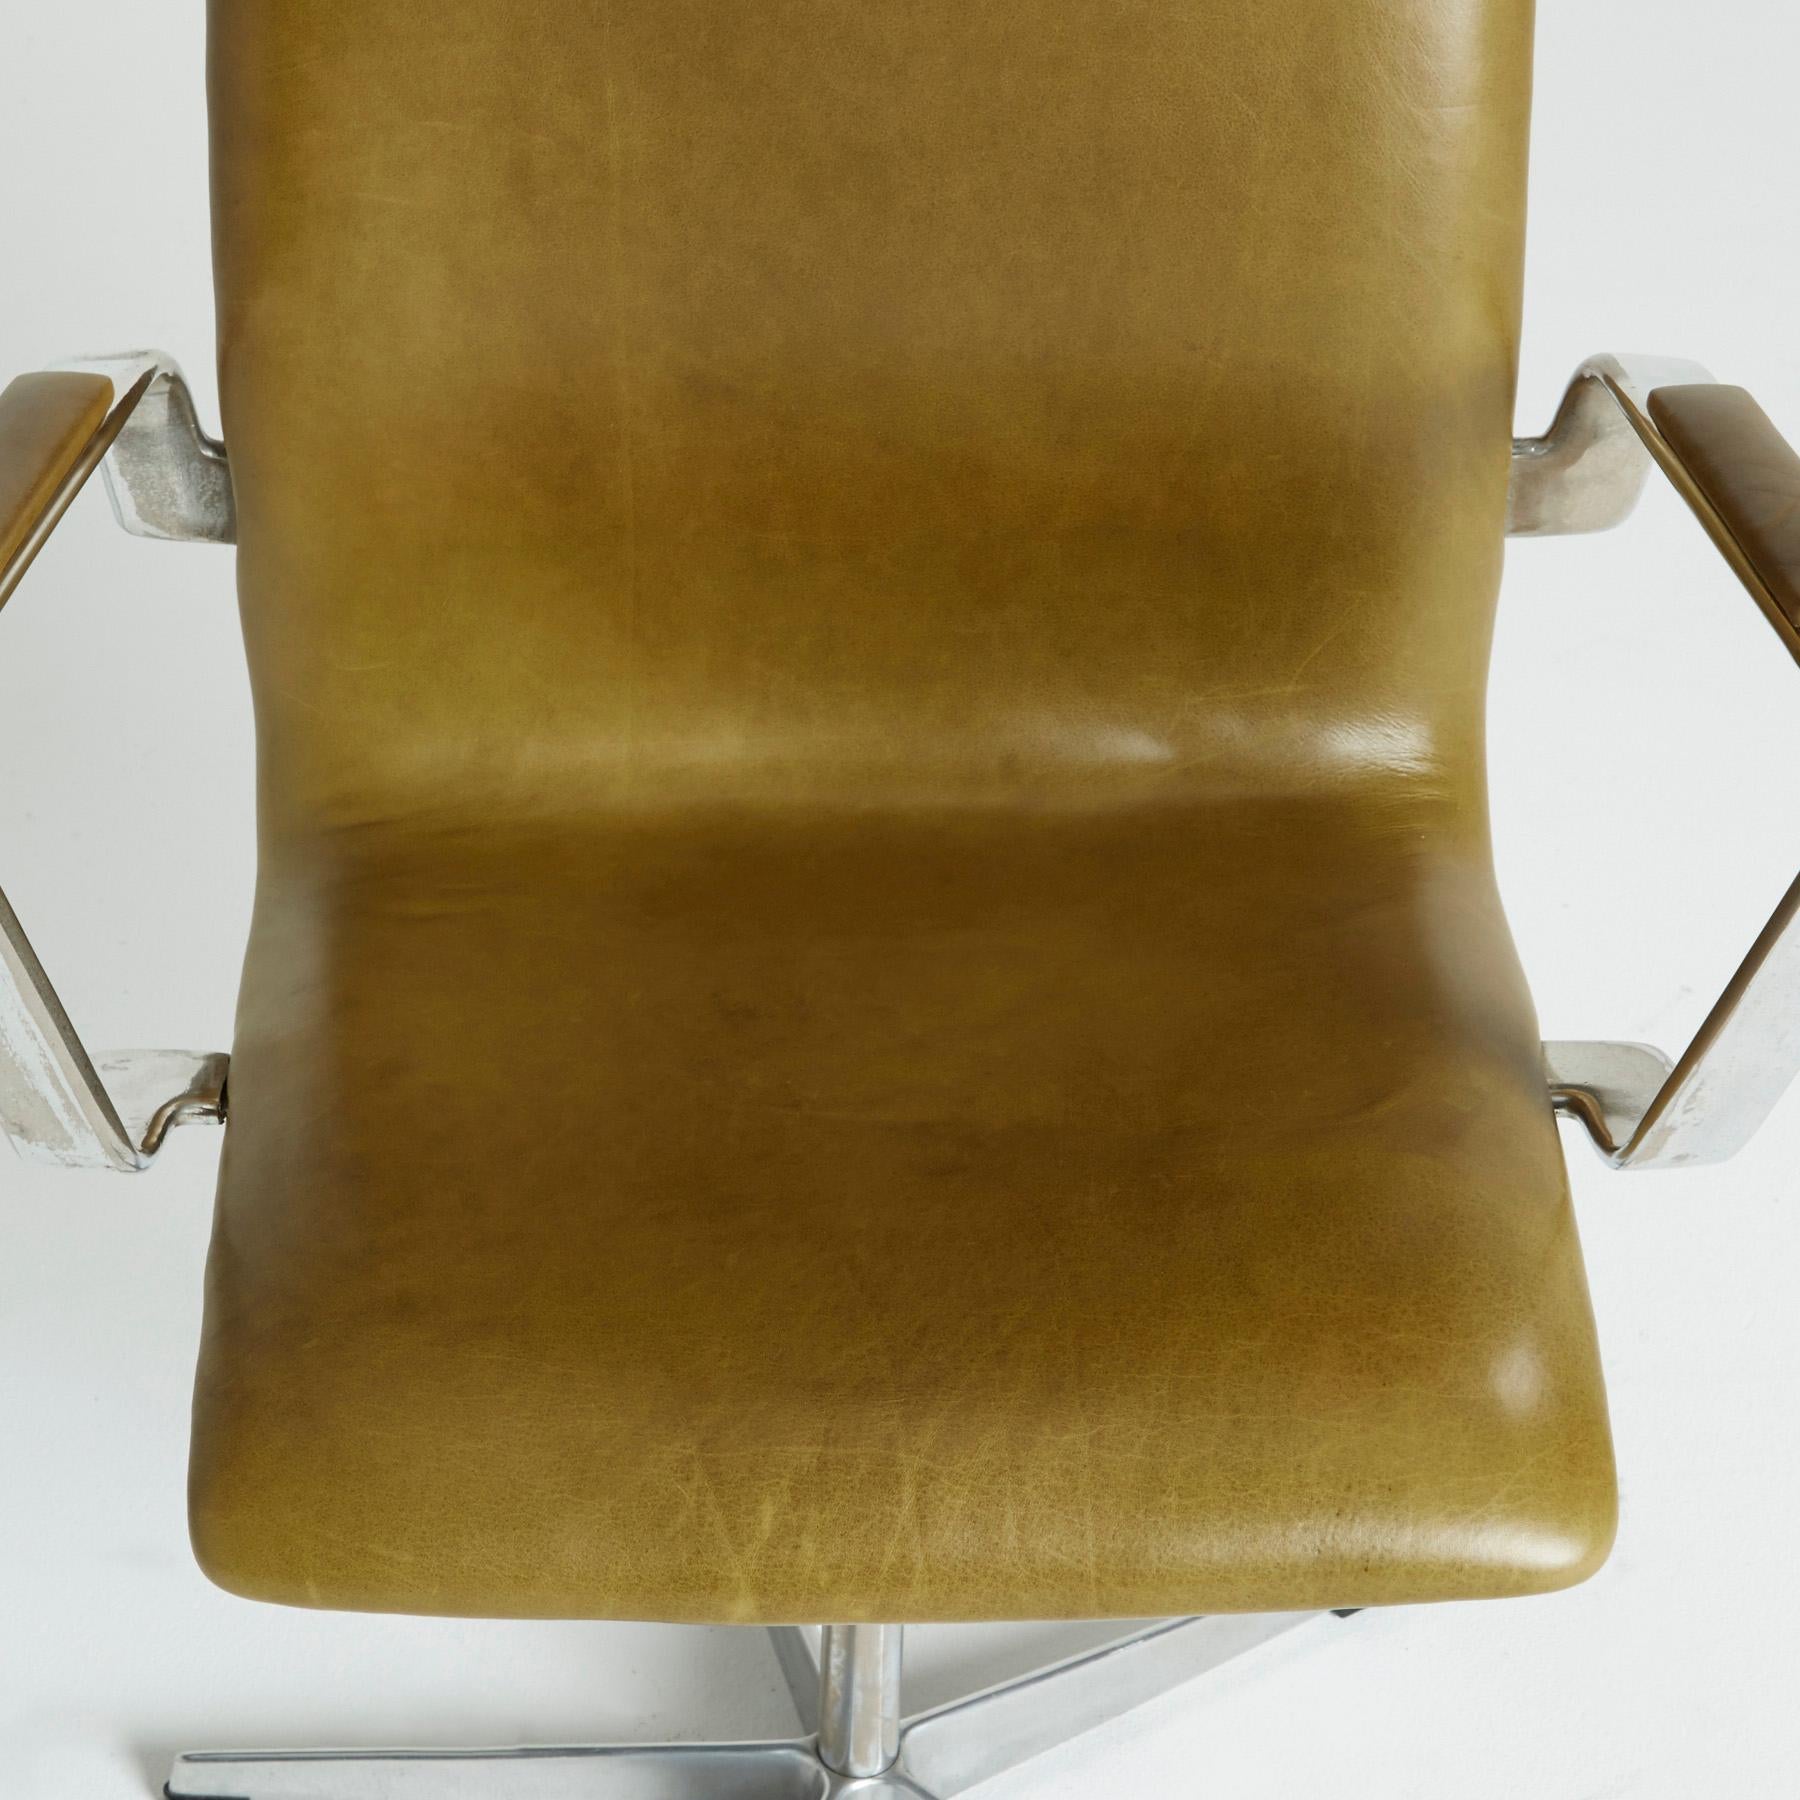 Late 20th Century Leather 'Oxford' Swivel Chair by Arne Jacobsen for Fritz Hansen, 1973, Signed